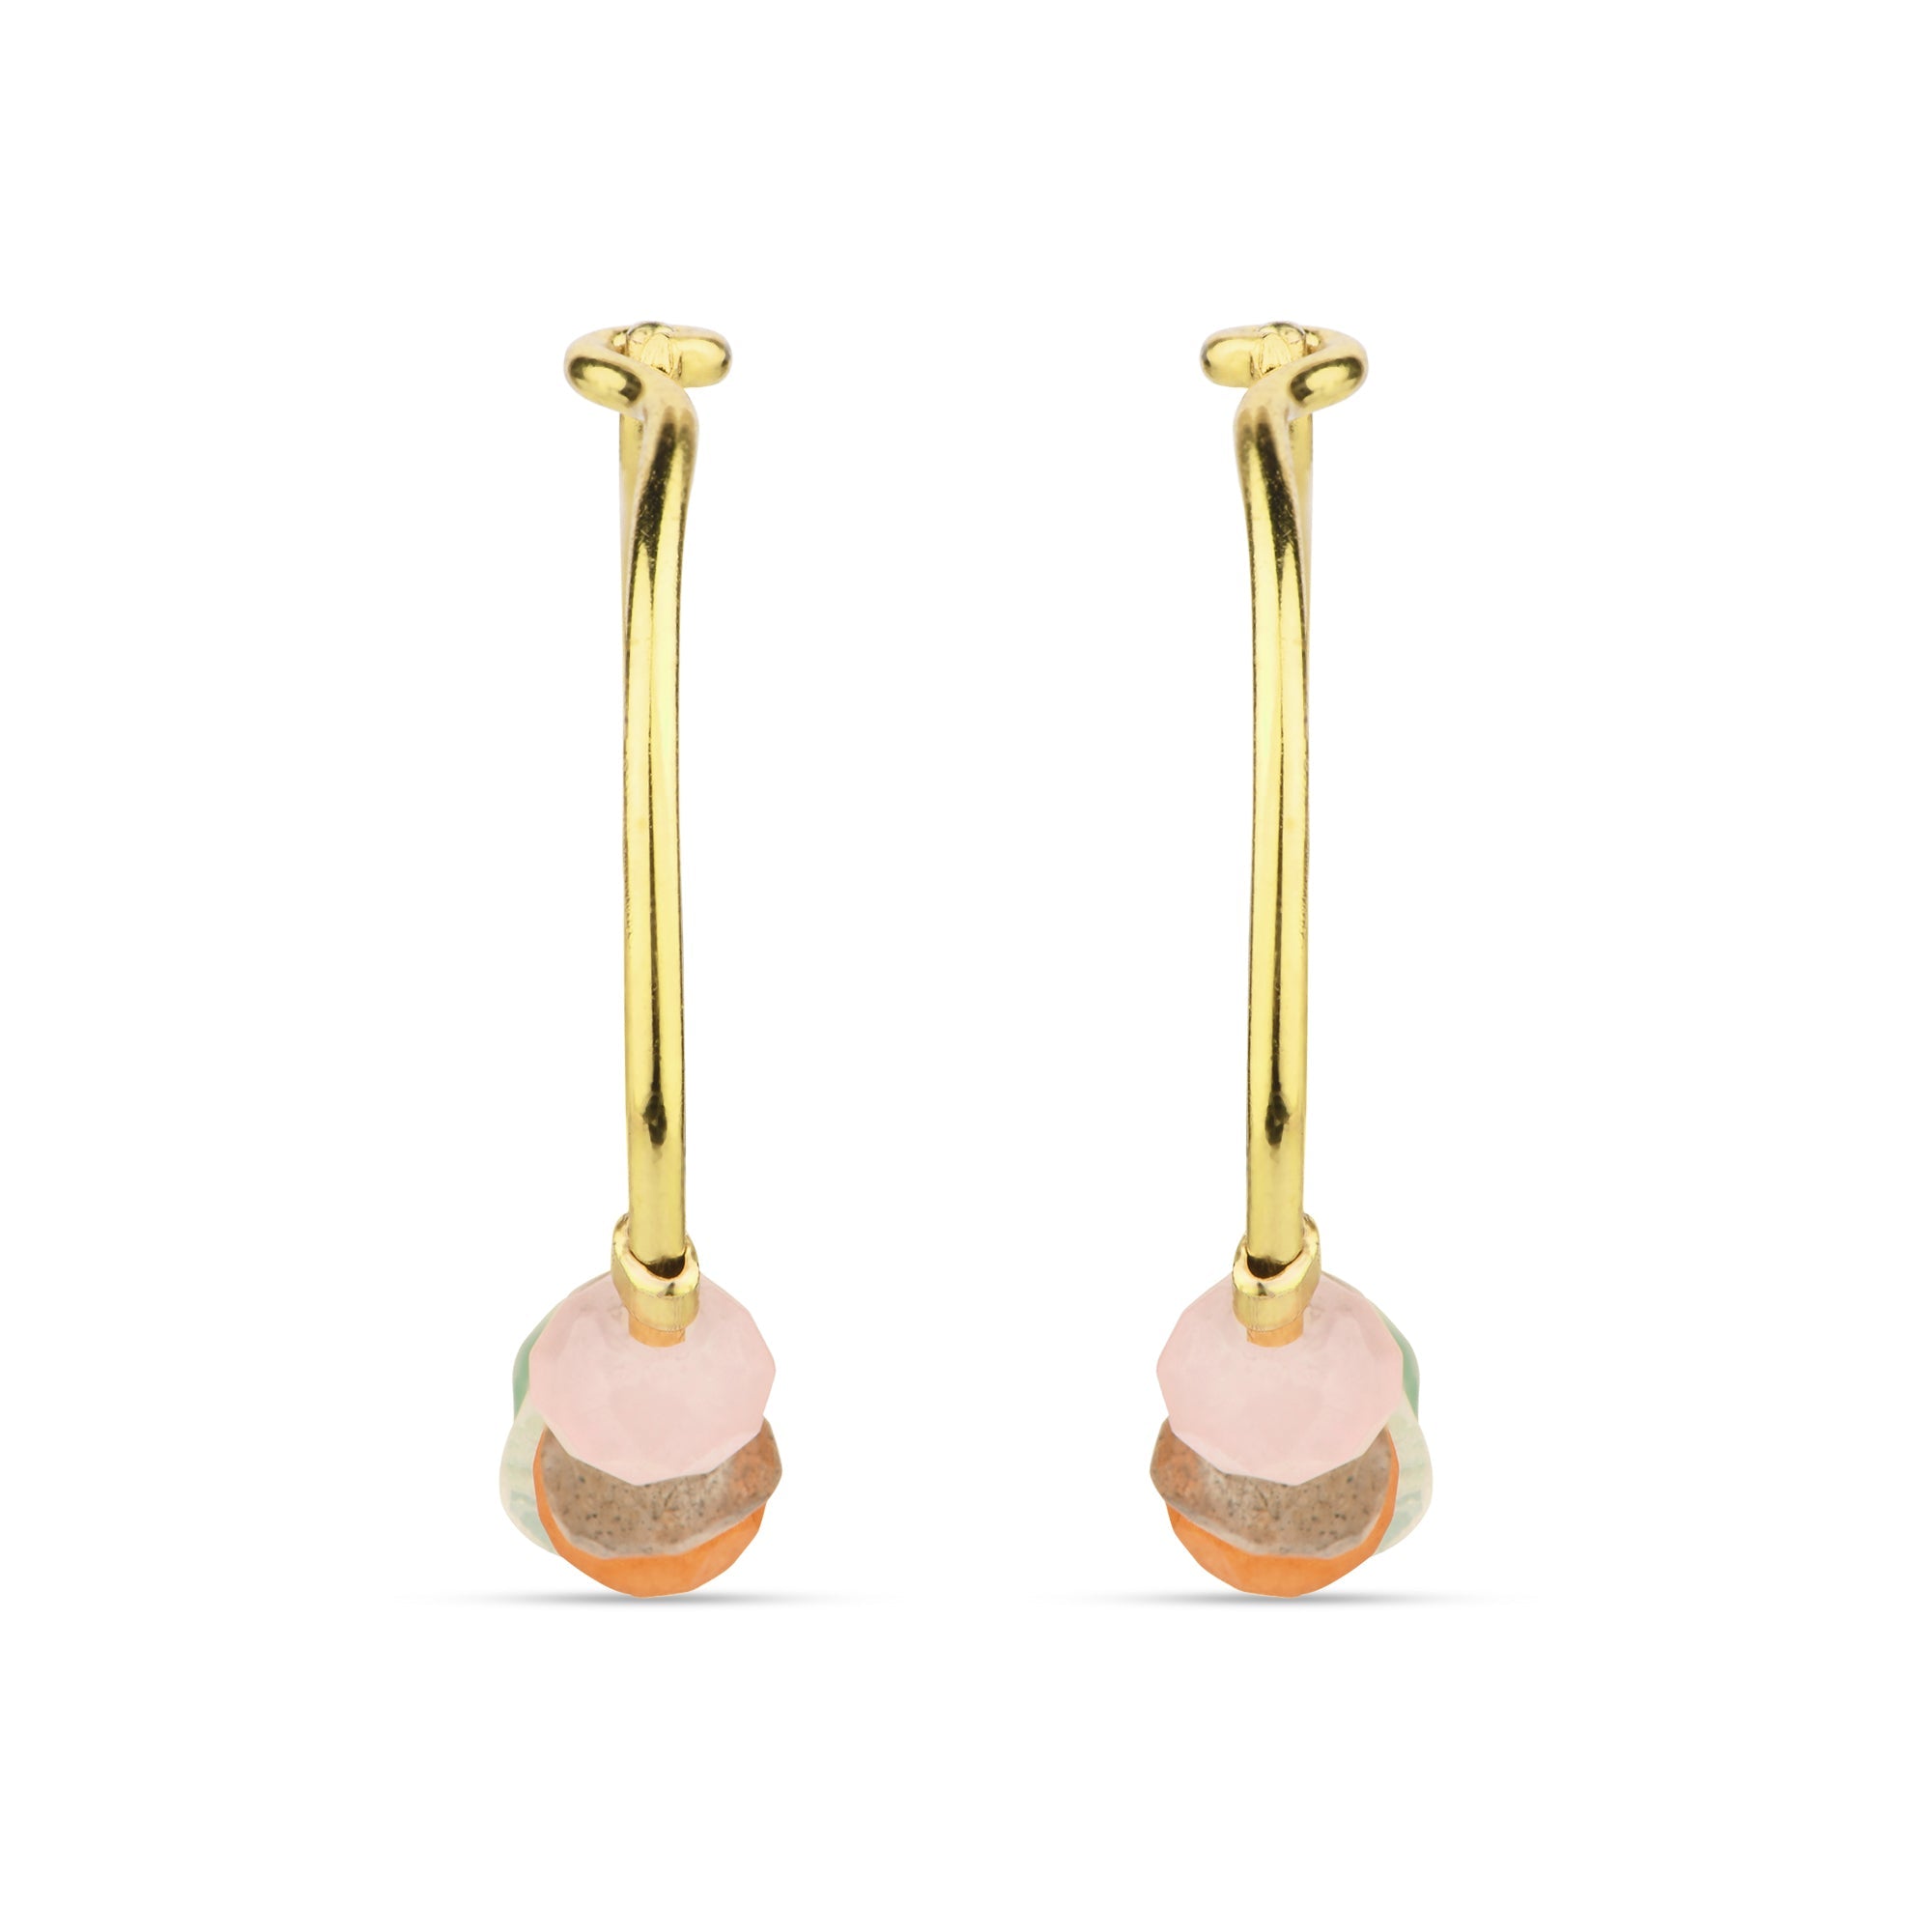 Real Gold Plated Z Healing Stone Hoops Earrings For Women By Accessorize London